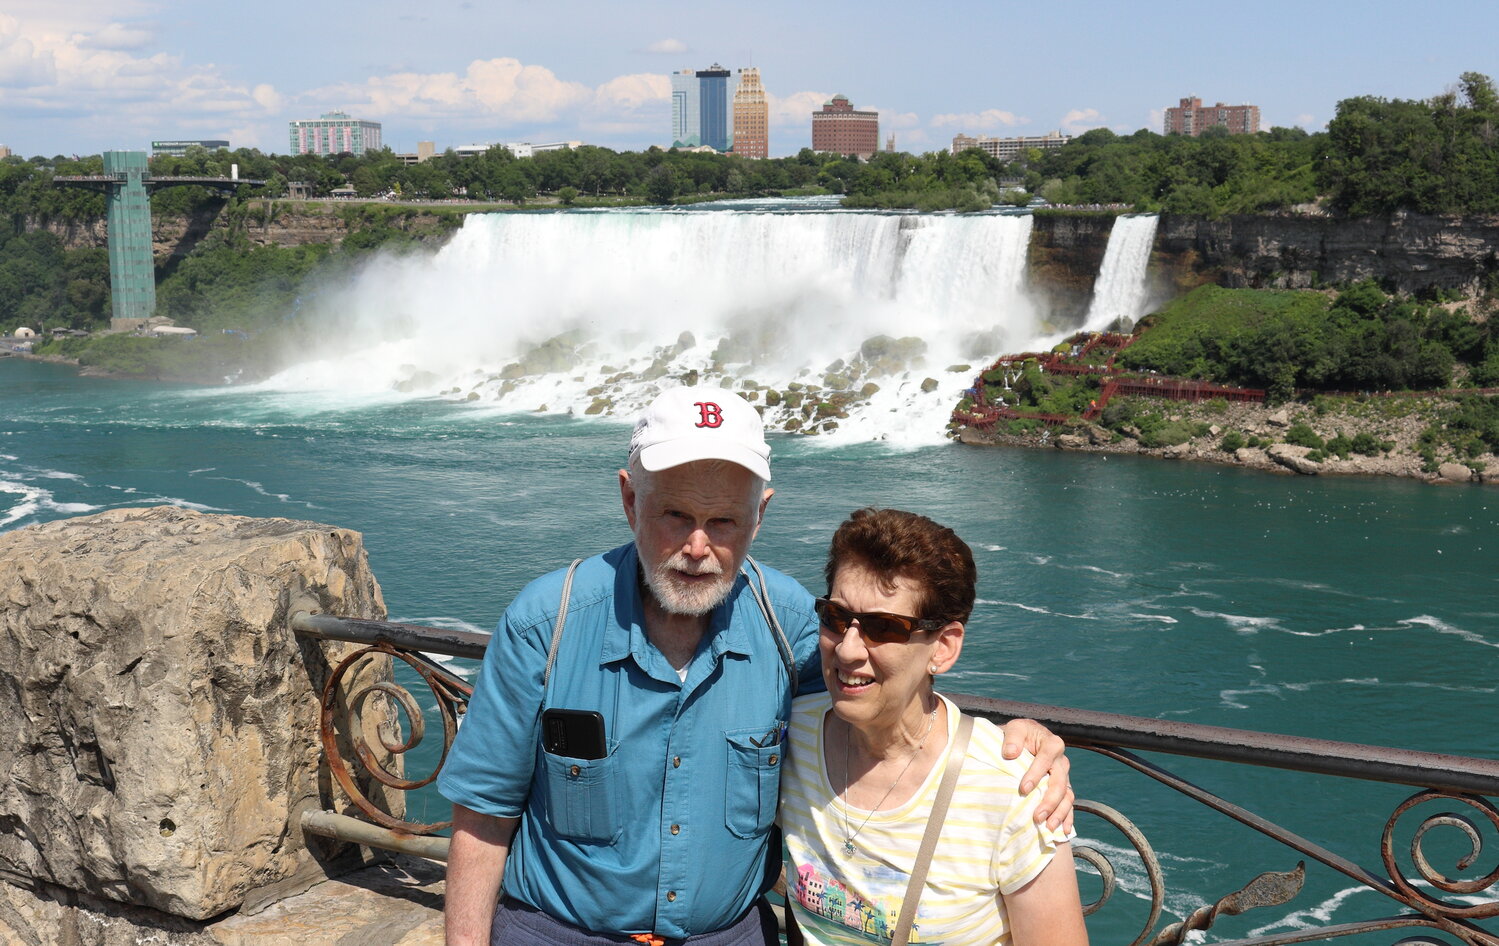 Larry Kessler and his wife, Lynne Cains, on vacation at Niagara Falls.